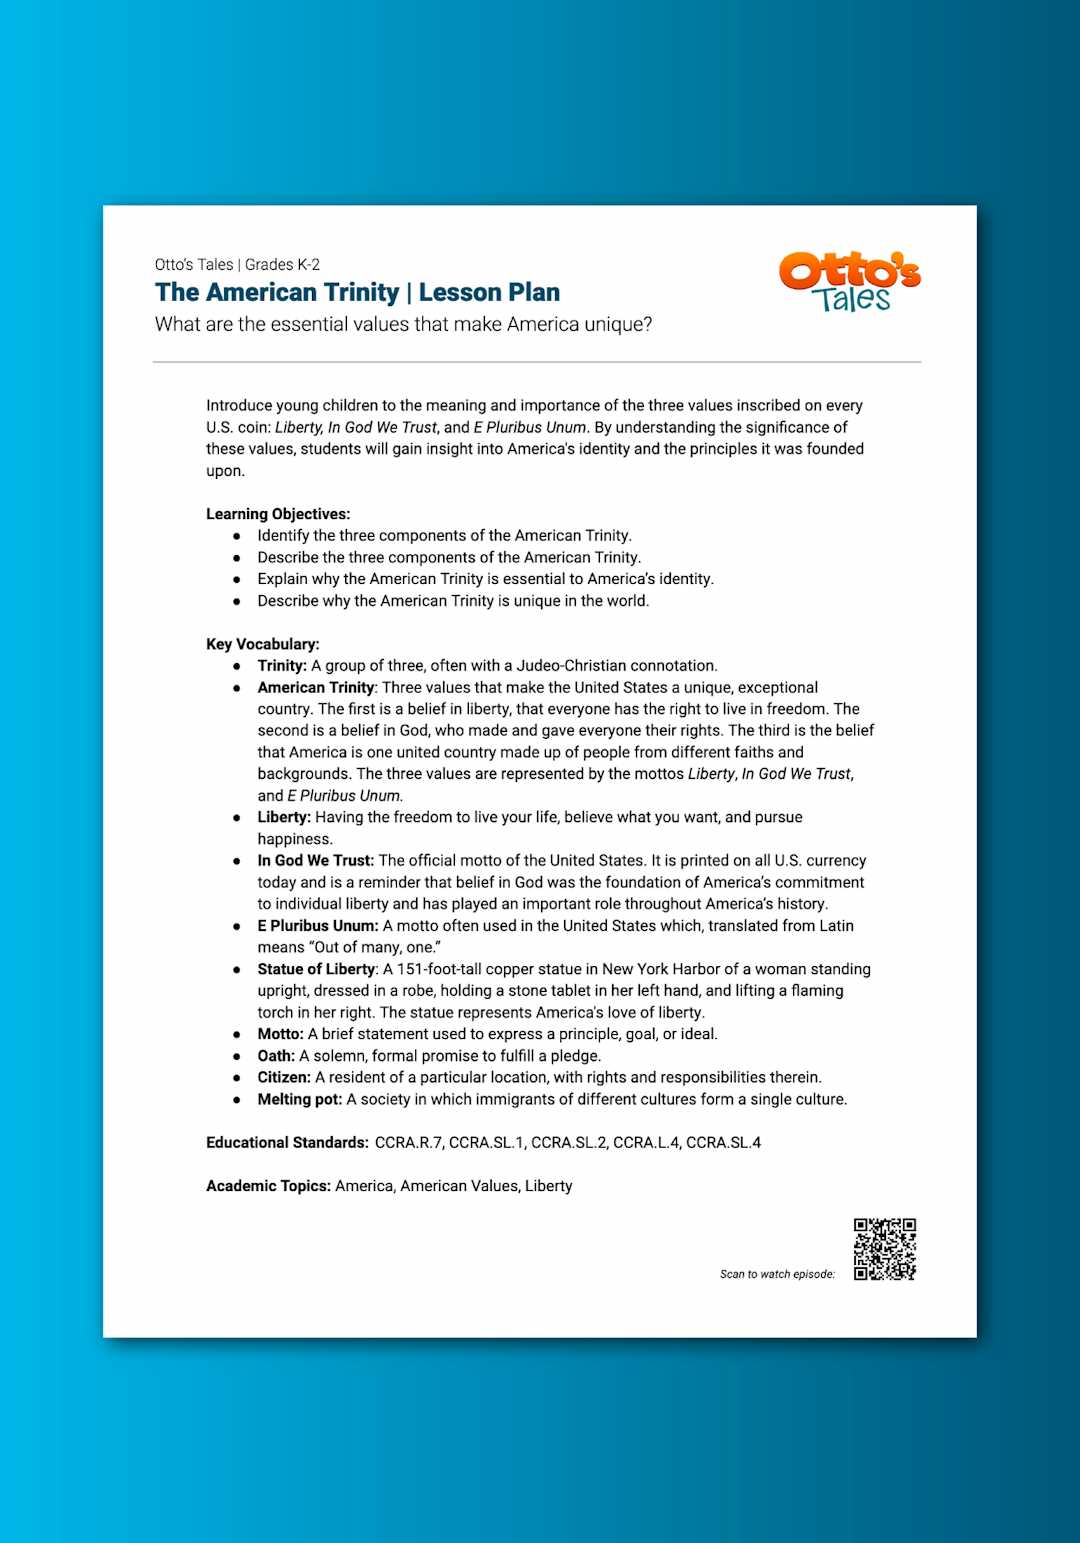 "Otto's Tales: The American Trinity" Lesson Plan